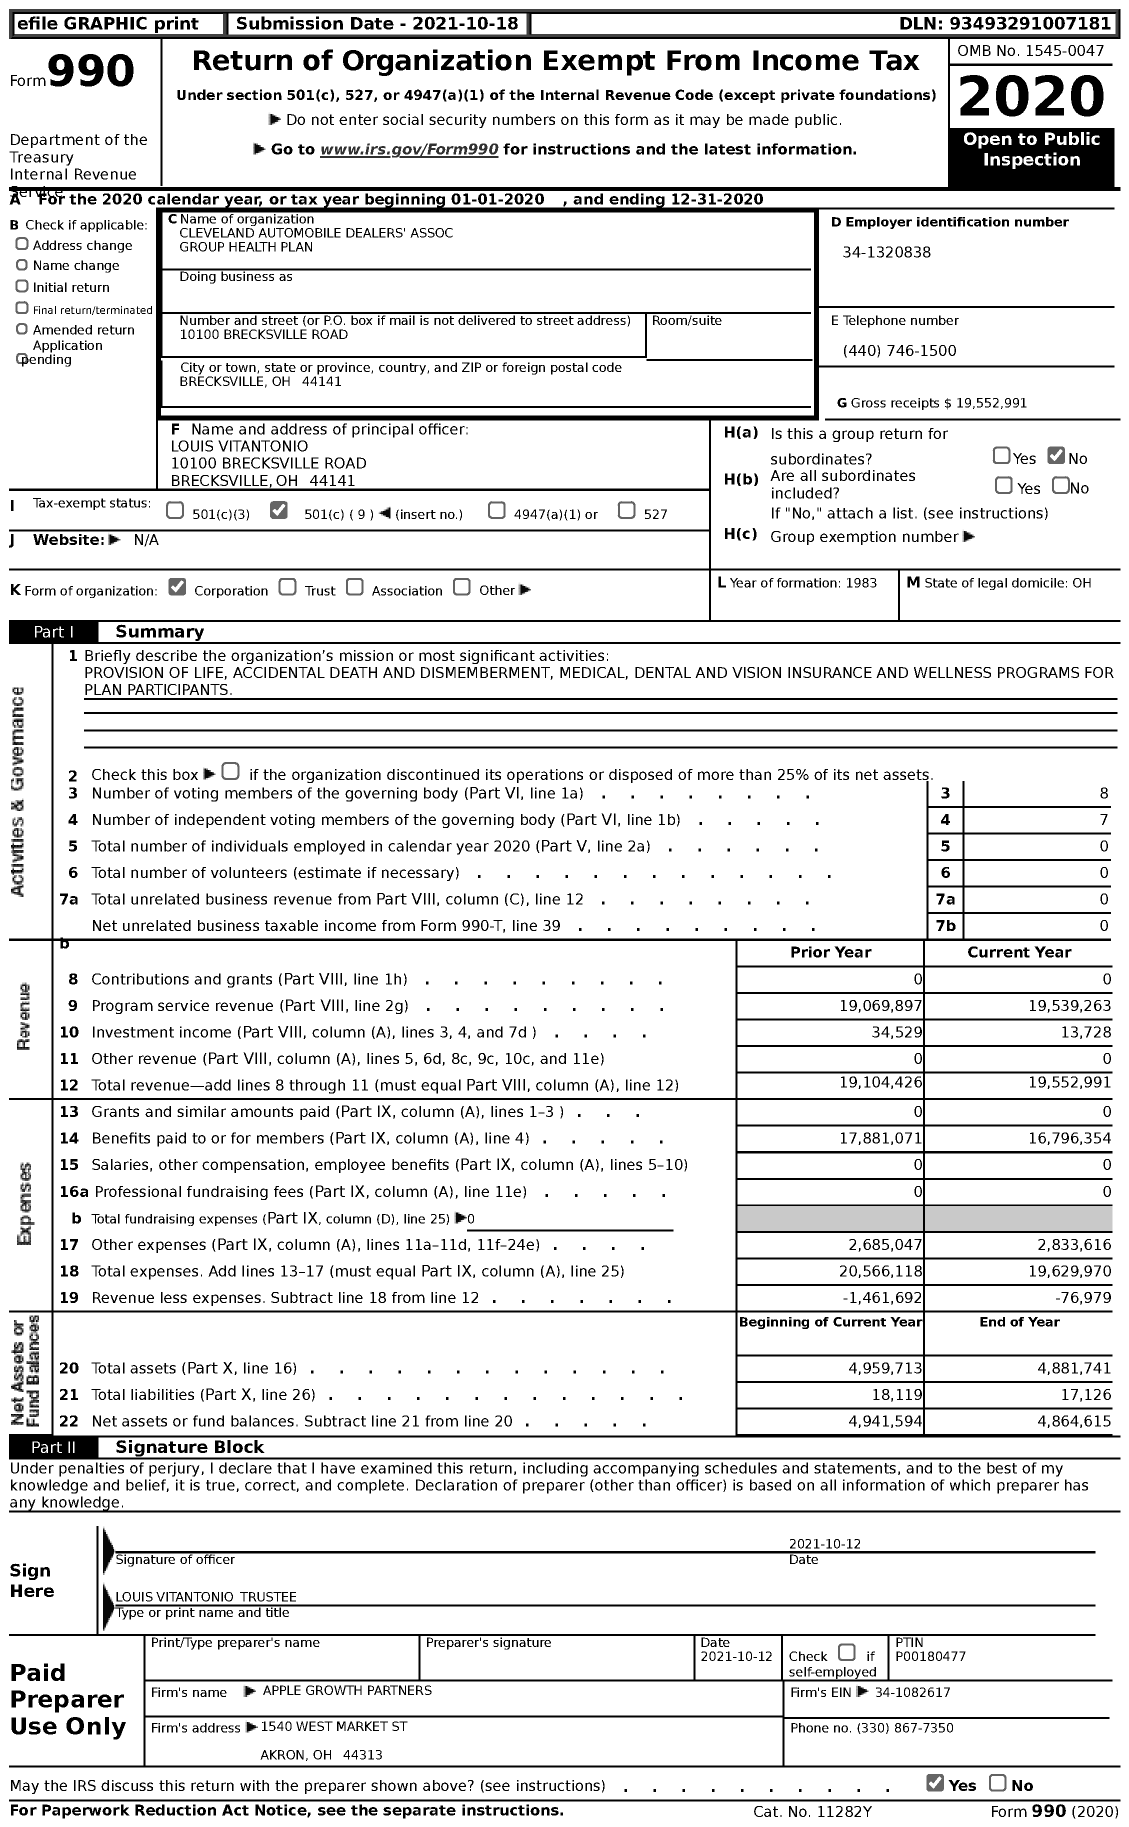 Image of first page of 2020 Form 990 for Cleveland Automobile Dealers' Association Group Health Plan